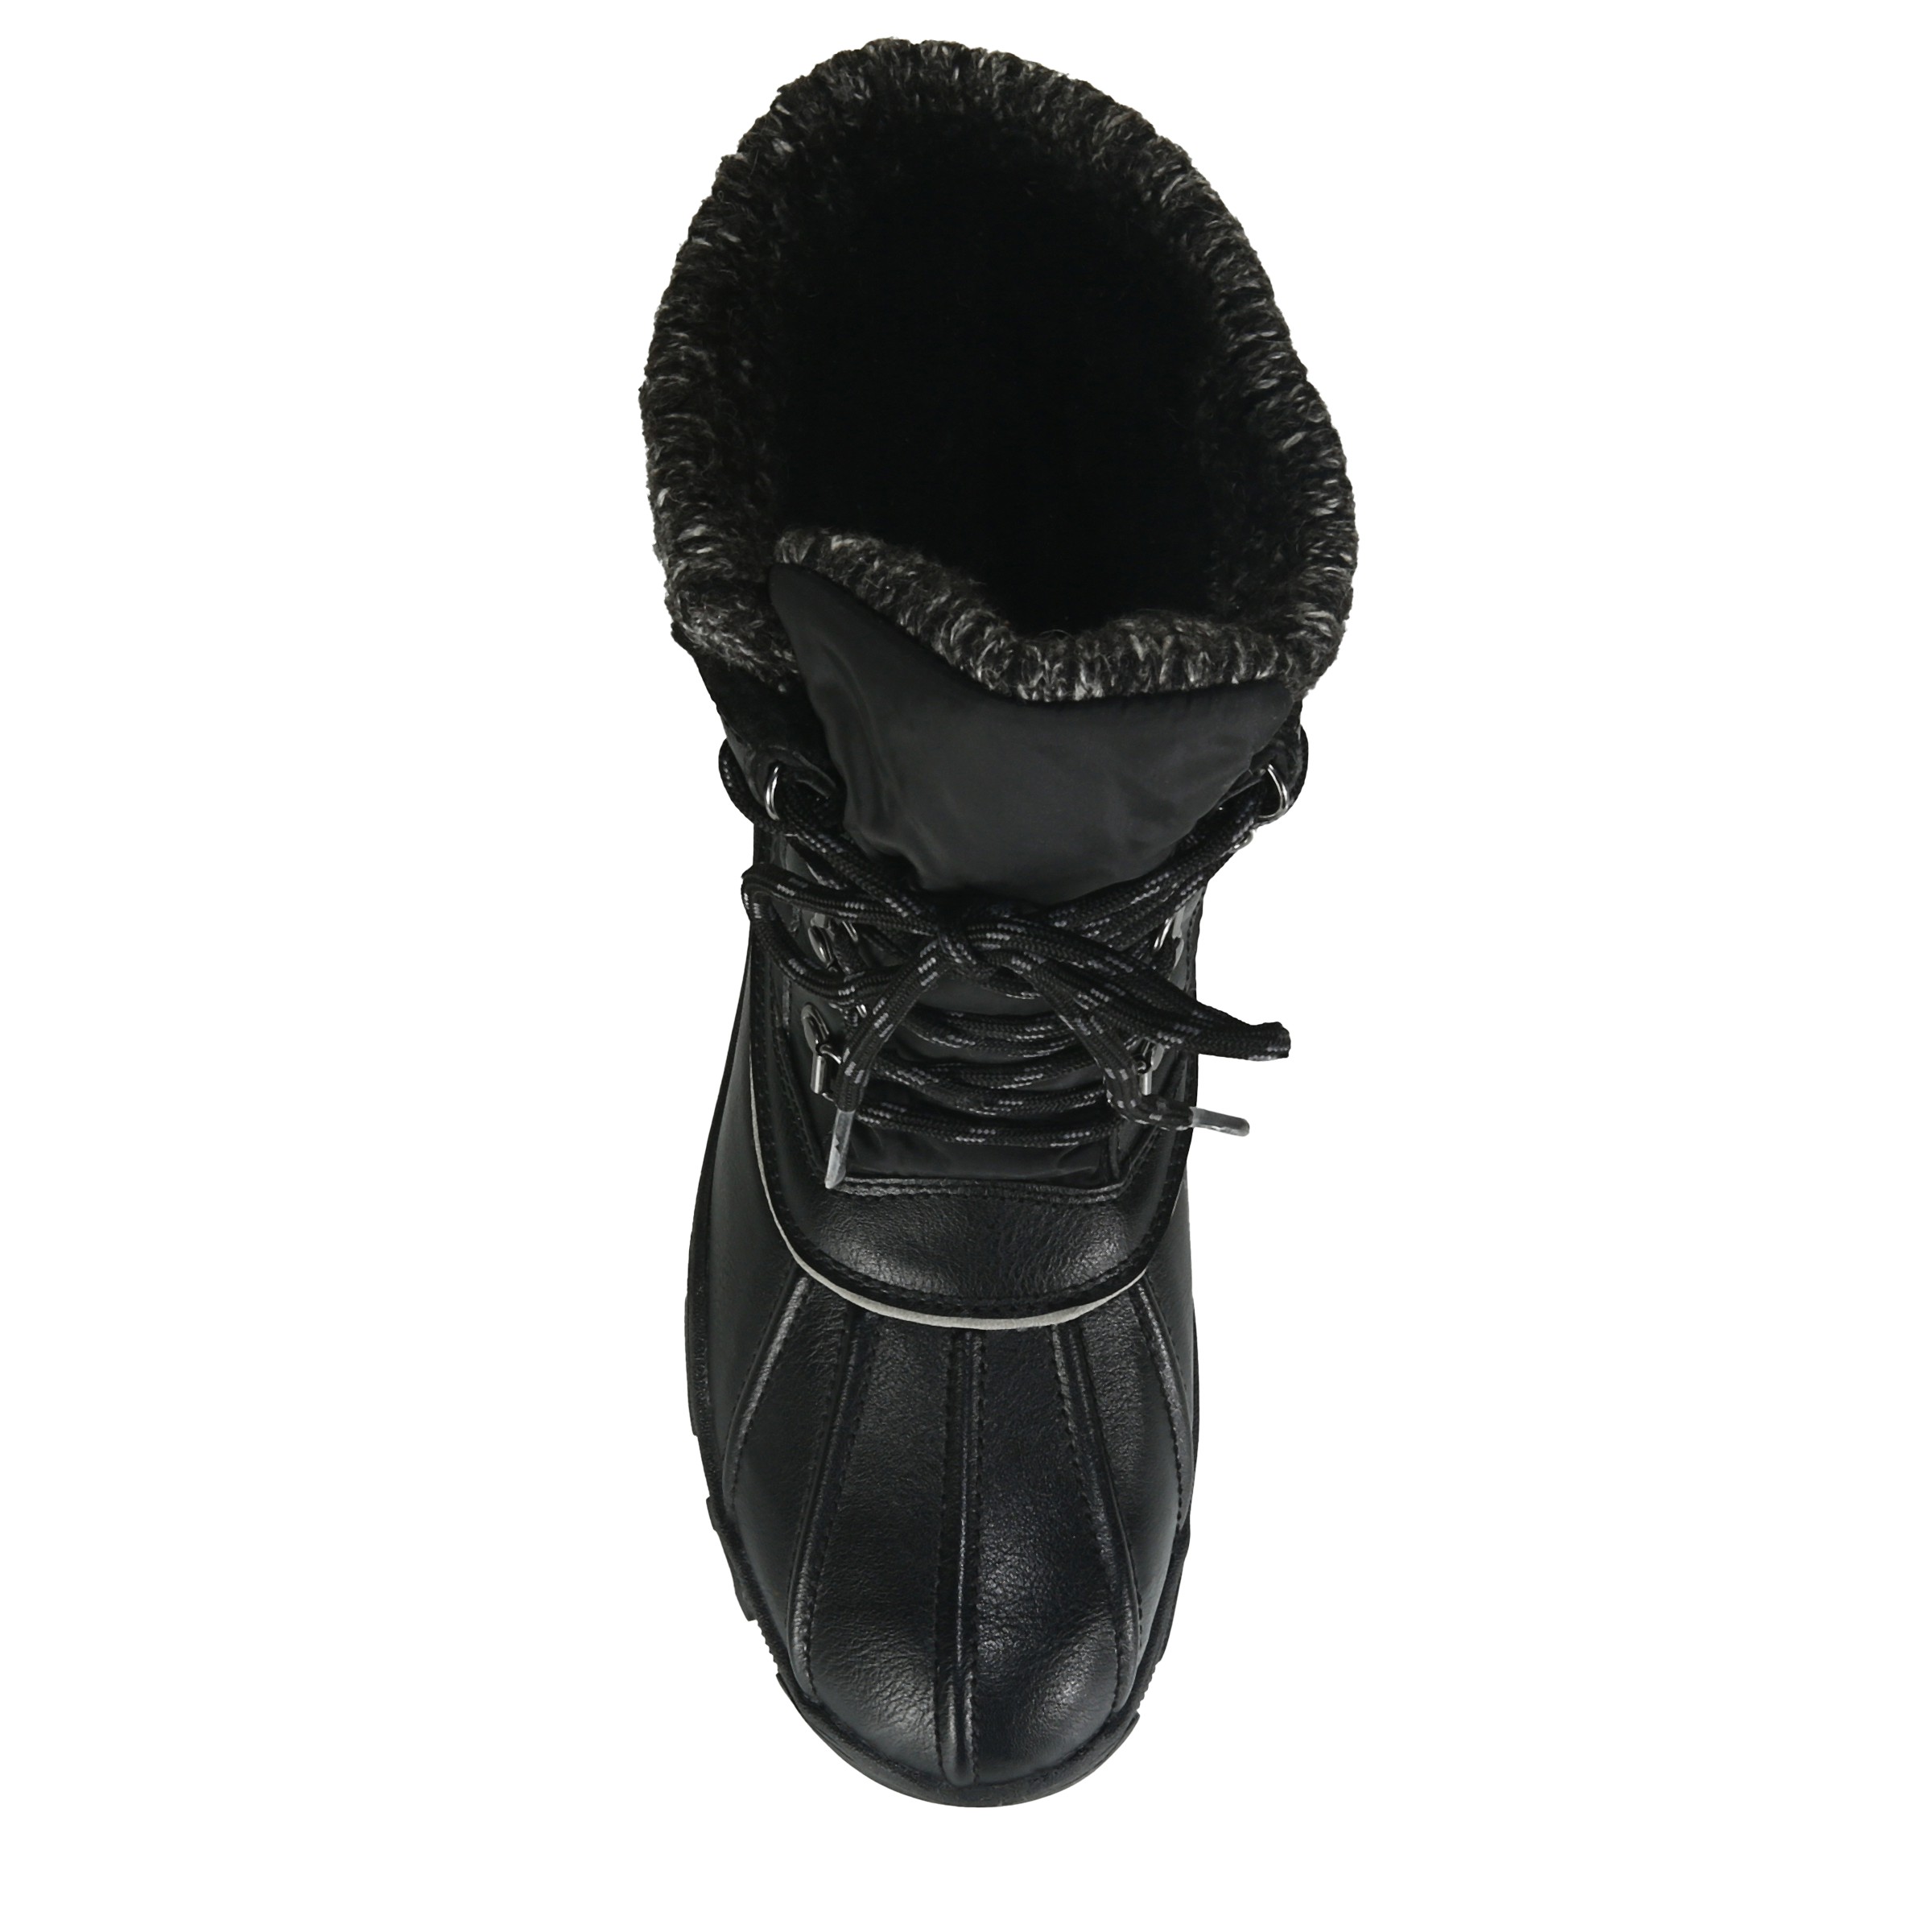 Women's WP Metal Spike Grip Cold Weather Boot